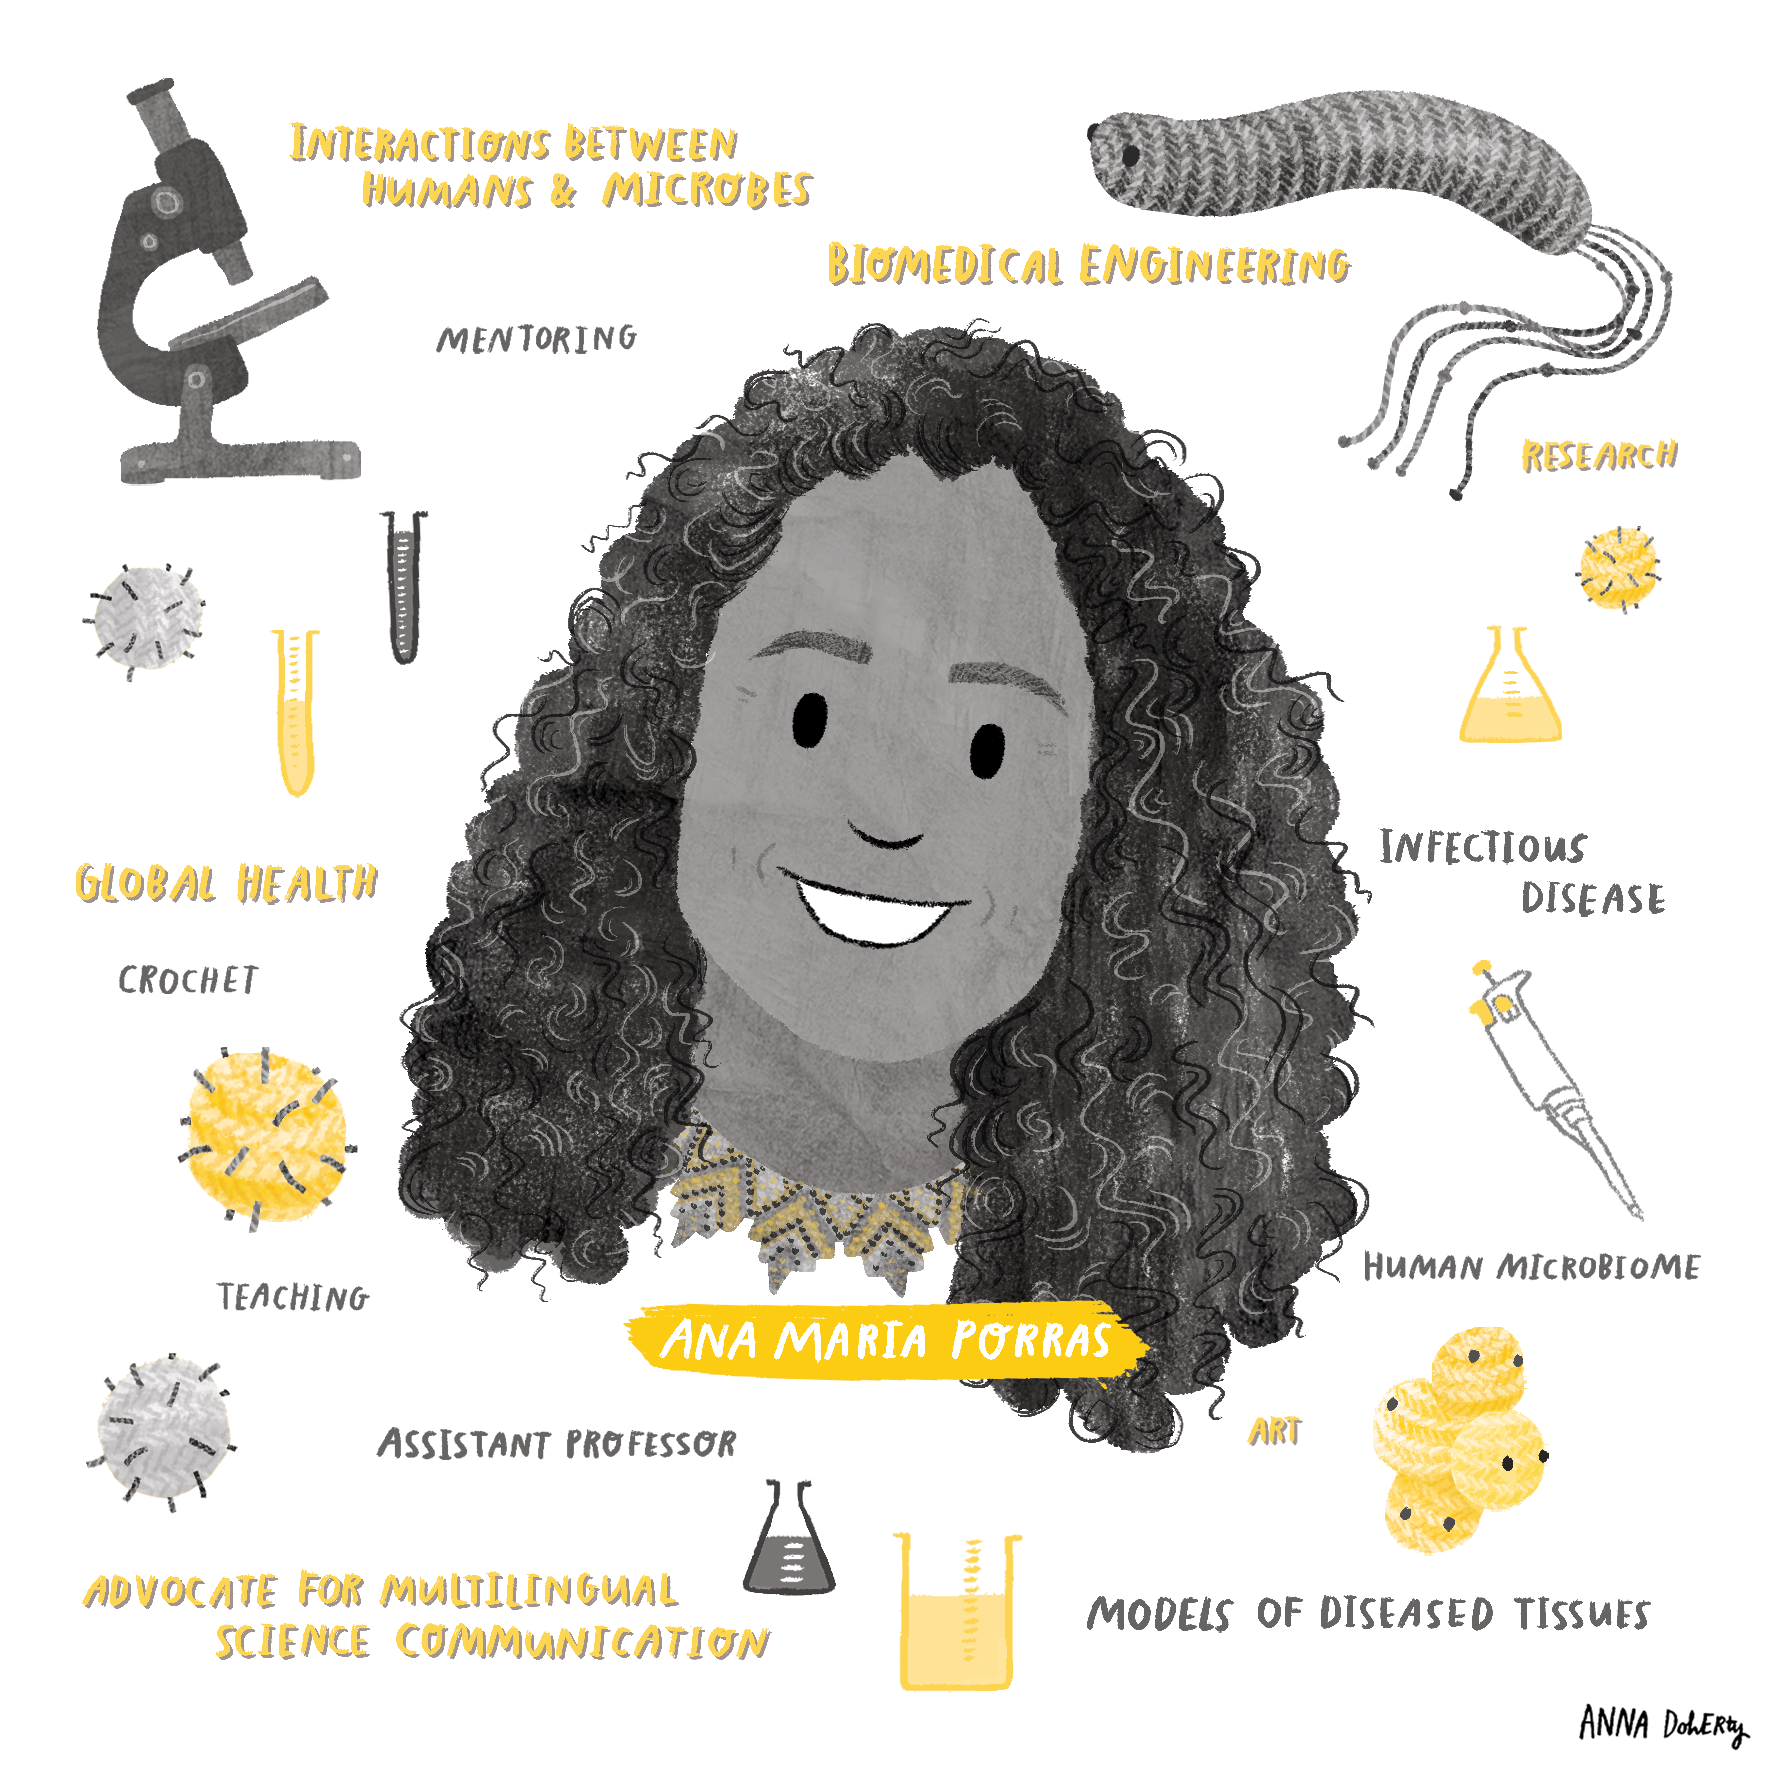 A portrait illustration of scientist Ana Maria Porras. Ana is surrounded by a microscope, test tubes along with the words biomedical enginnering, infectious disease, global health, advocate for multilingual science communication